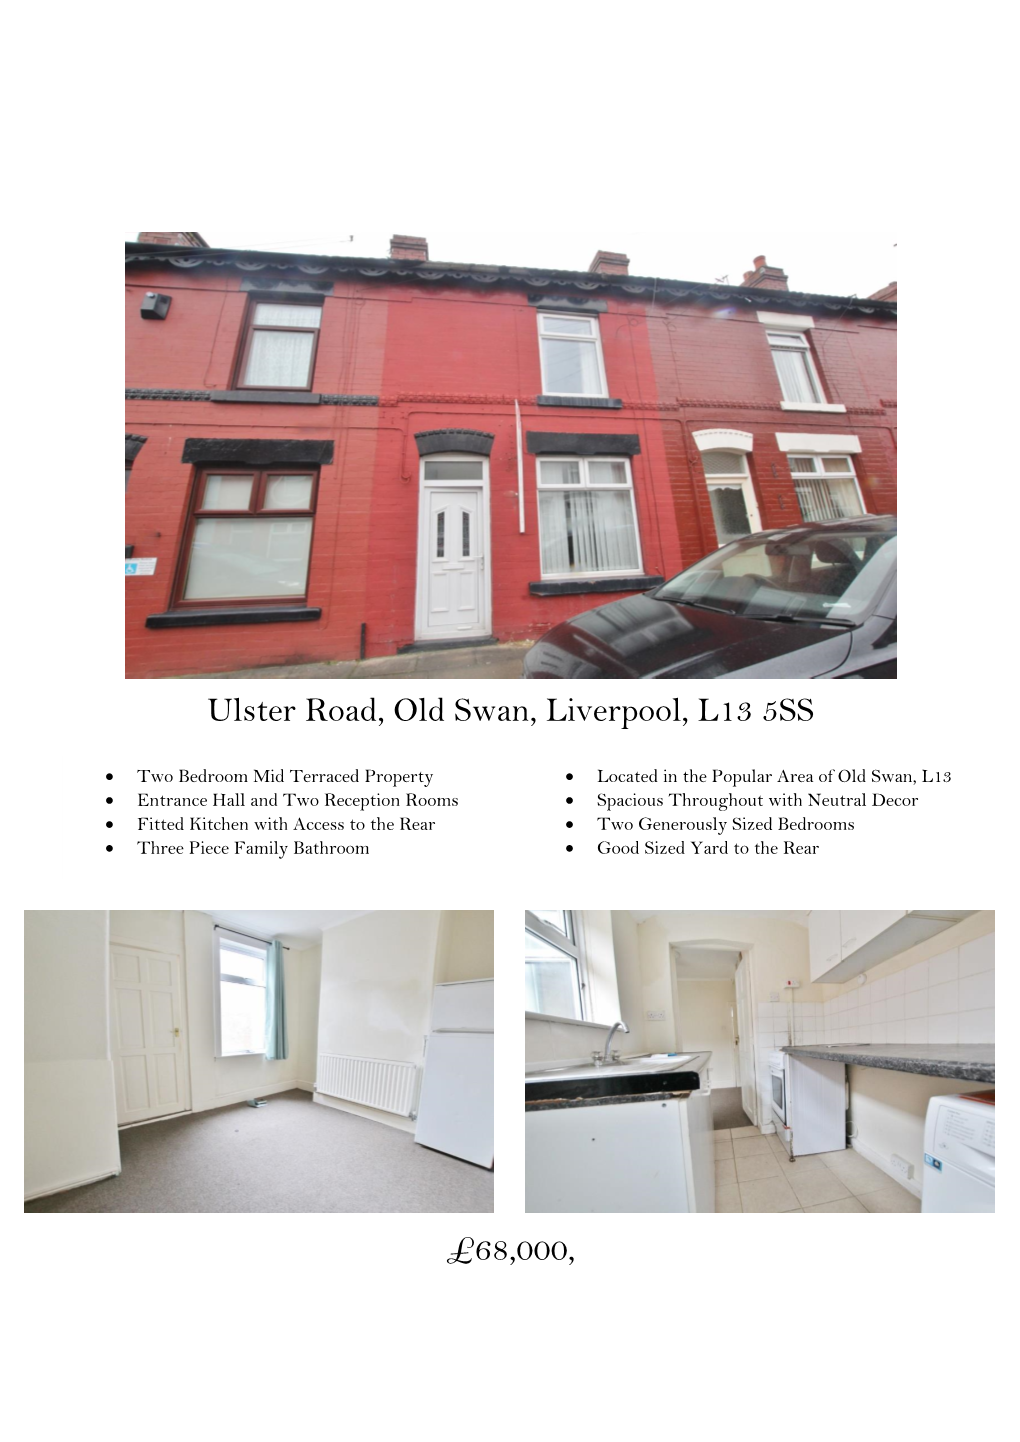 Ulster Road, Old Swan, Liverpool, L13 5SS £68,000